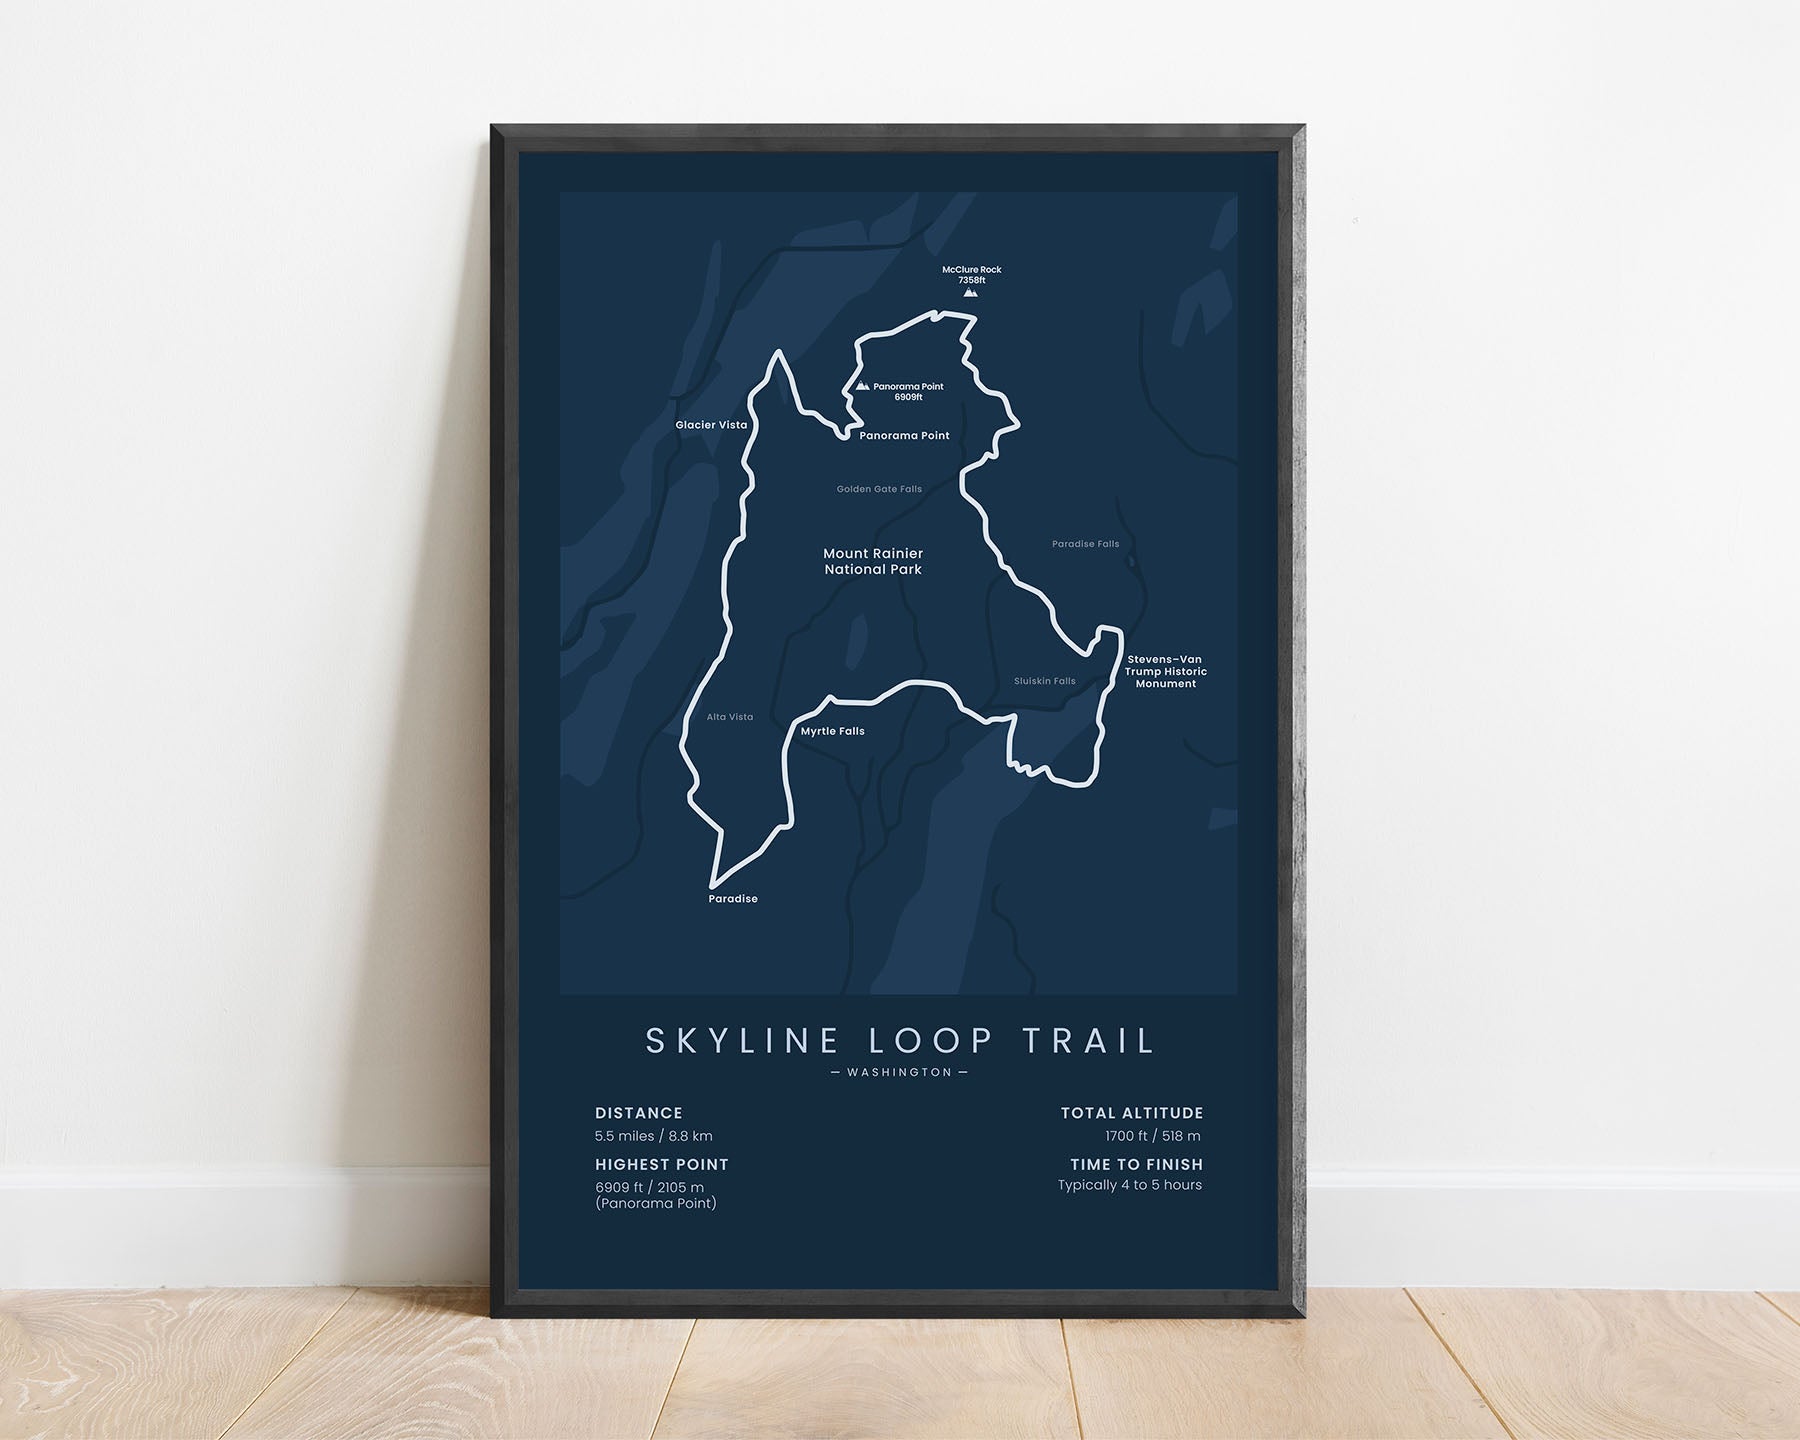 Skyline Loop (Mt Rainier National Park) Trail Poster with Blue Background